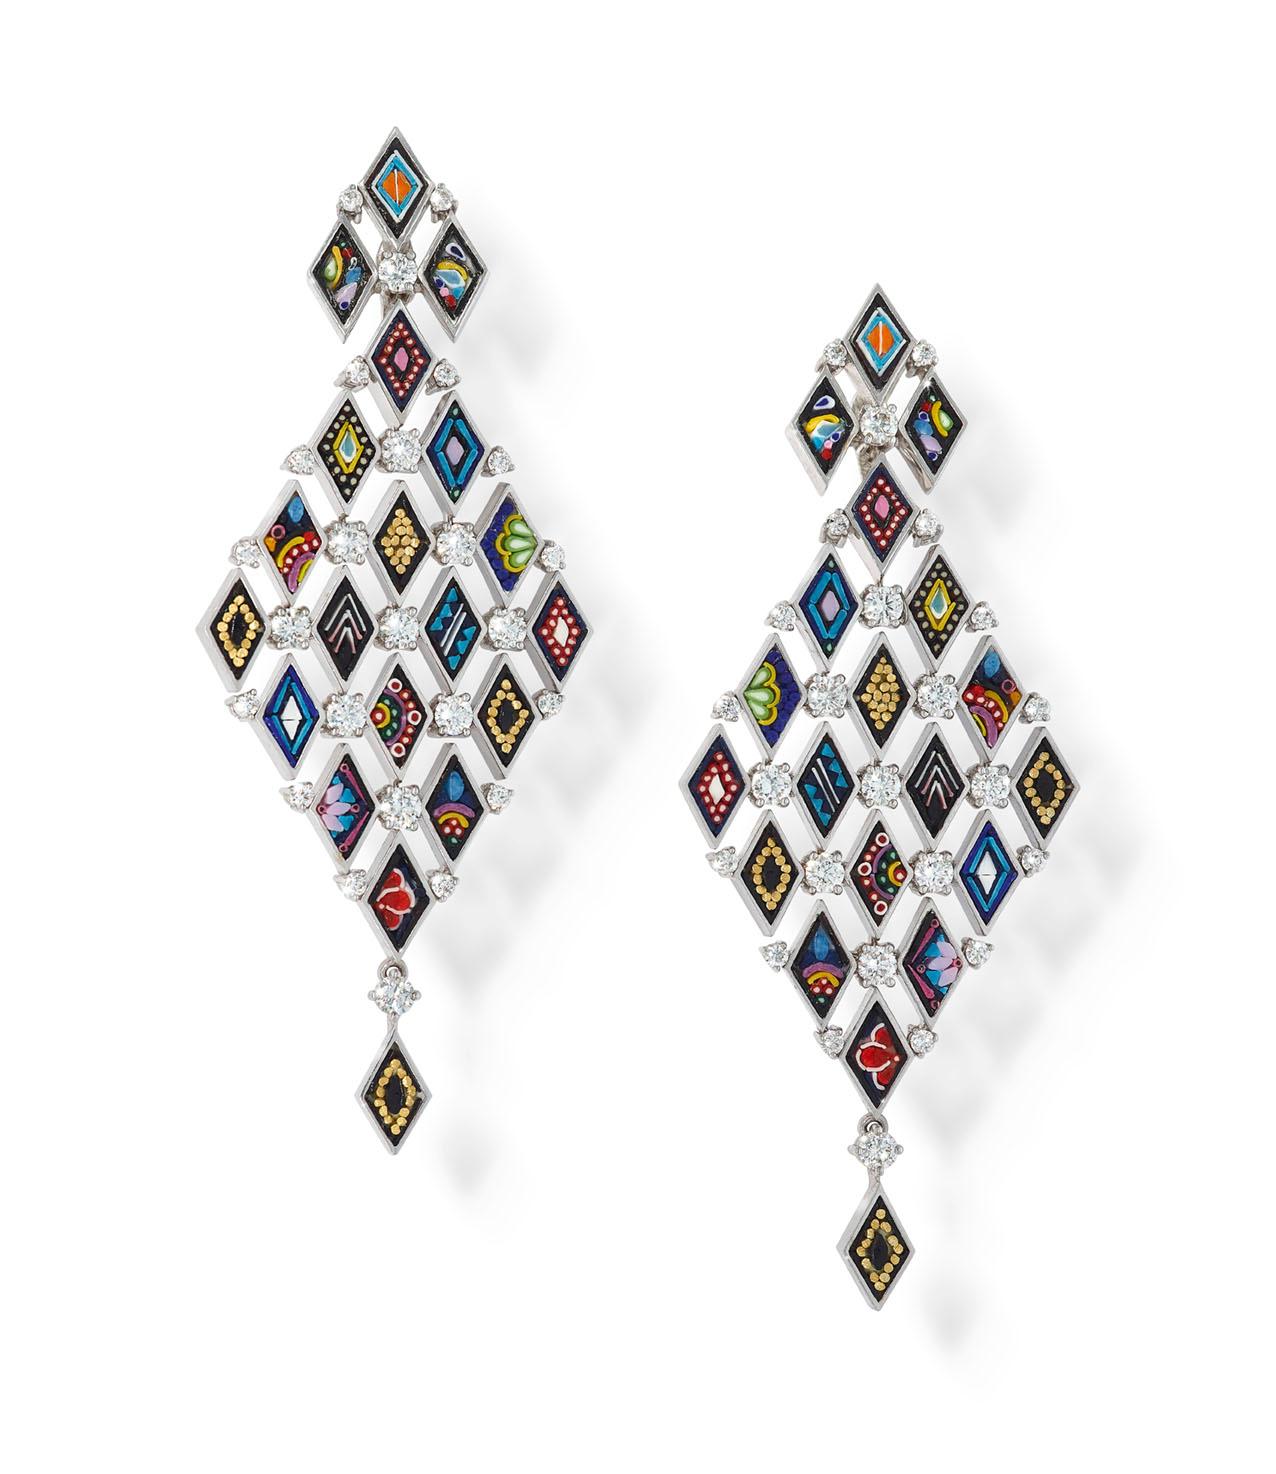 Brilliant Cut Stylish Modern Earrings White Gold White Diamonds HandDecorated with MicroMosaic For Sale